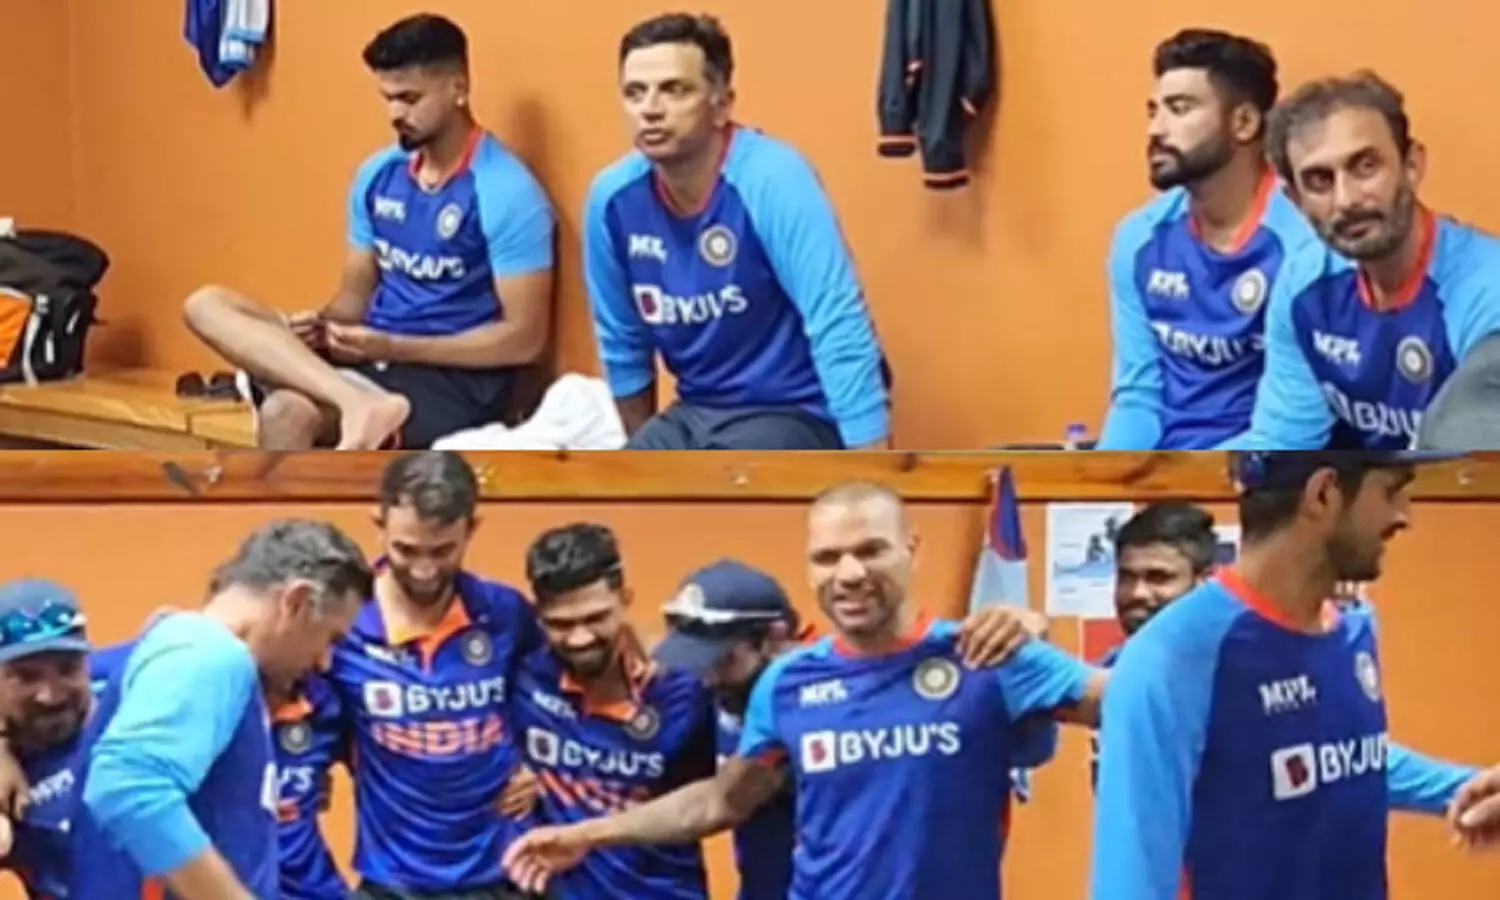 Watch: After Dravids serious speech, Dhawans unexpected stunt in dressing room